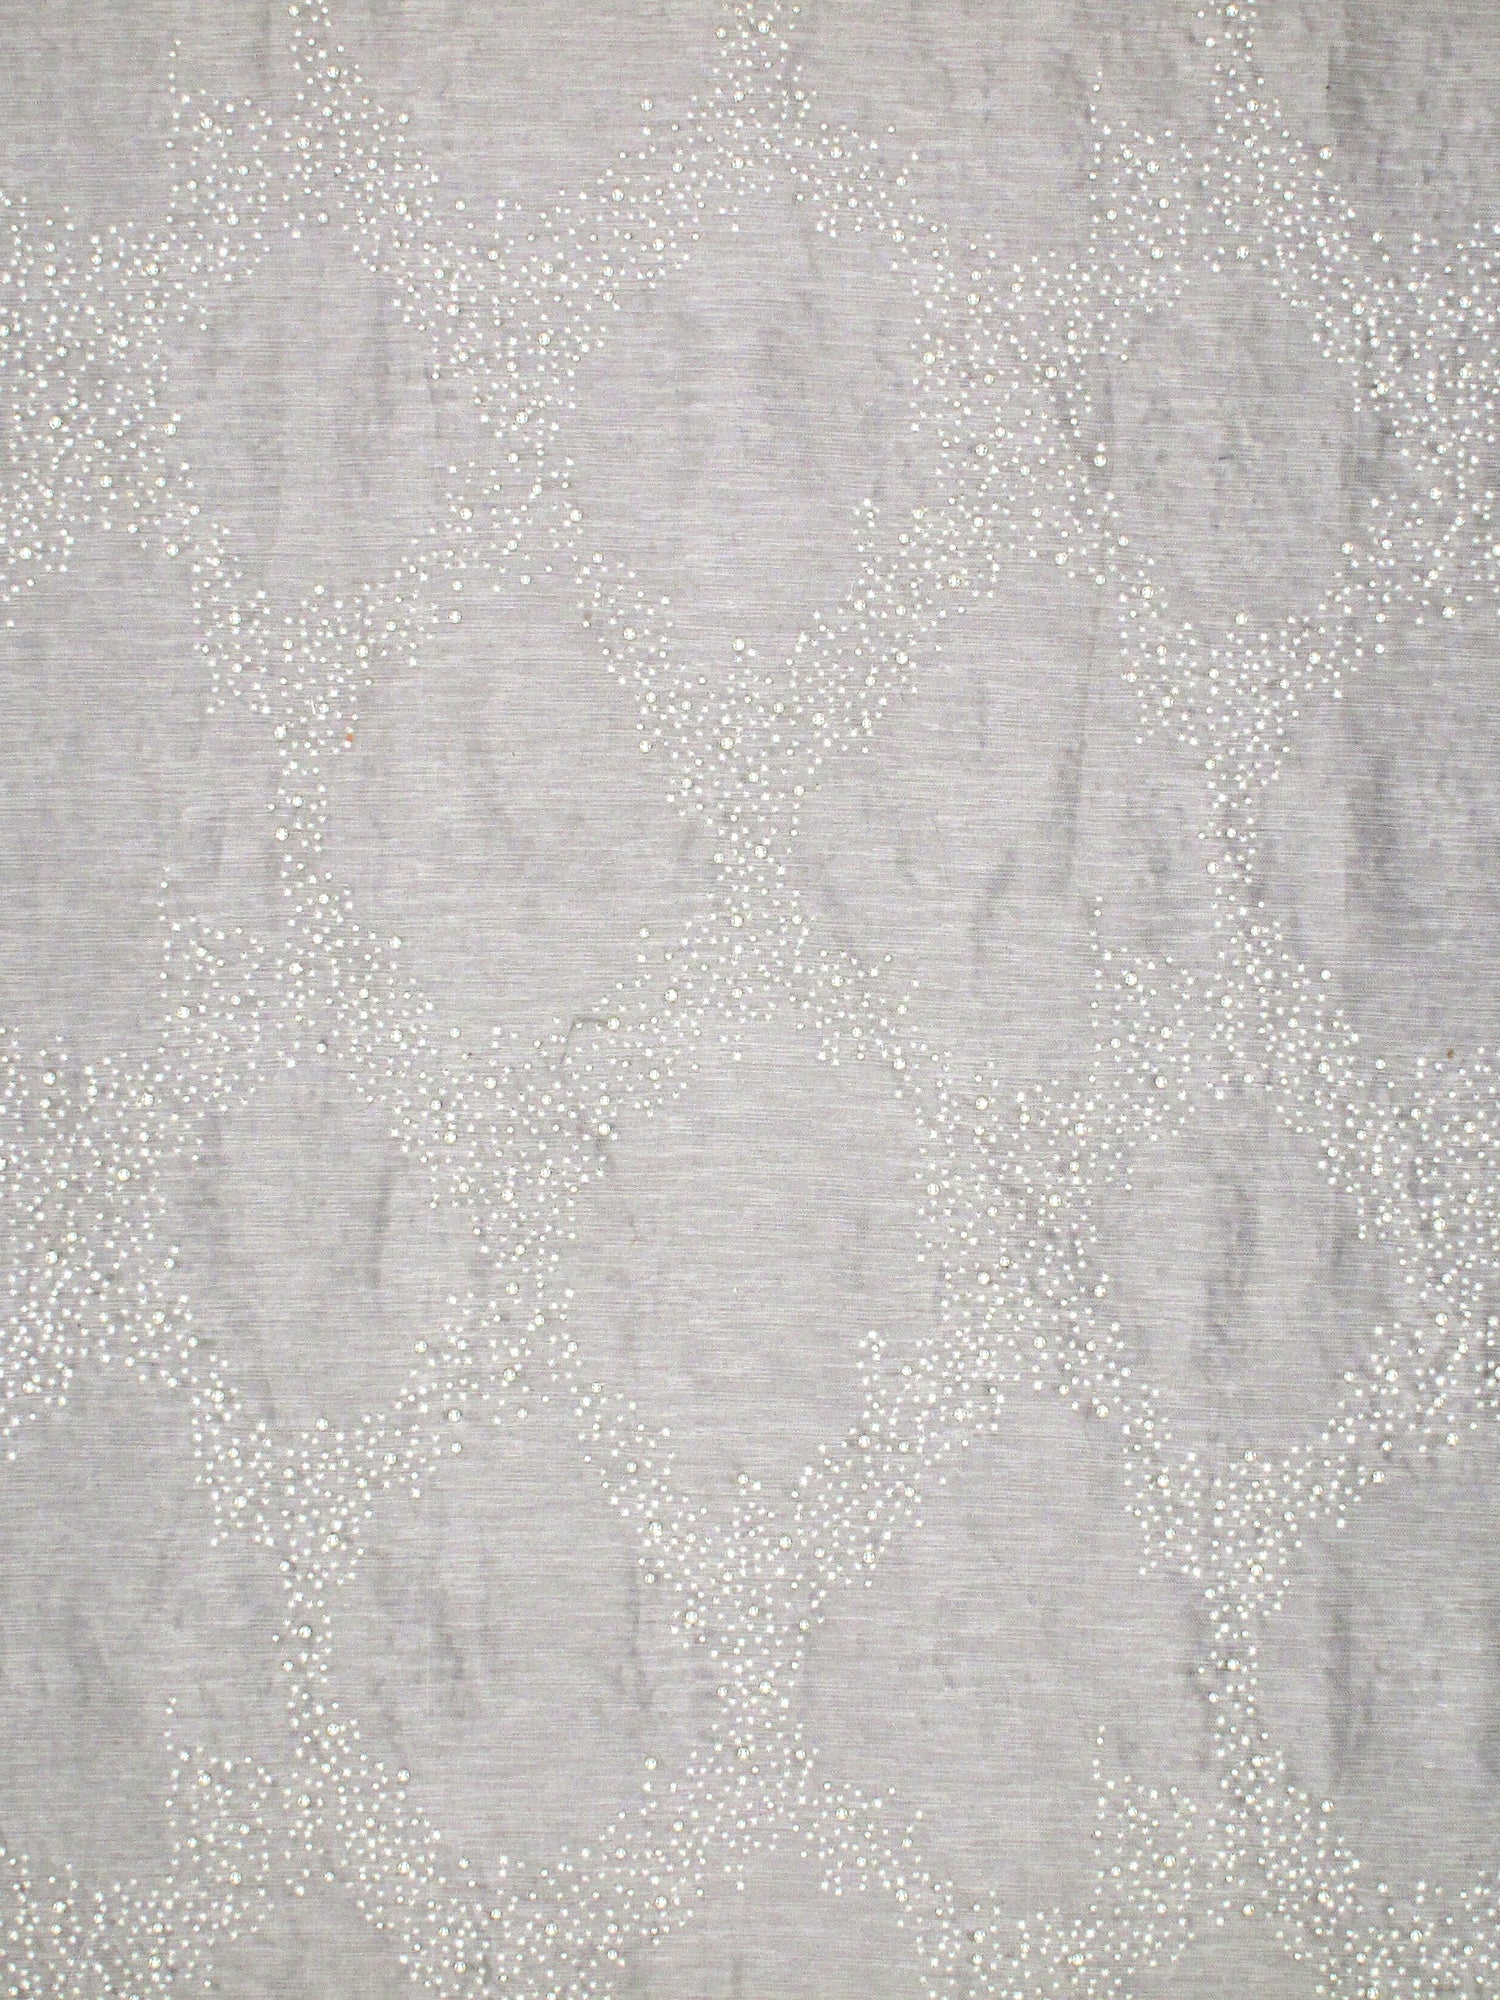 Pearlescence fabric in taupe color - pattern number M1 00021017 - by Scalamandre in the Old World Weavers collection